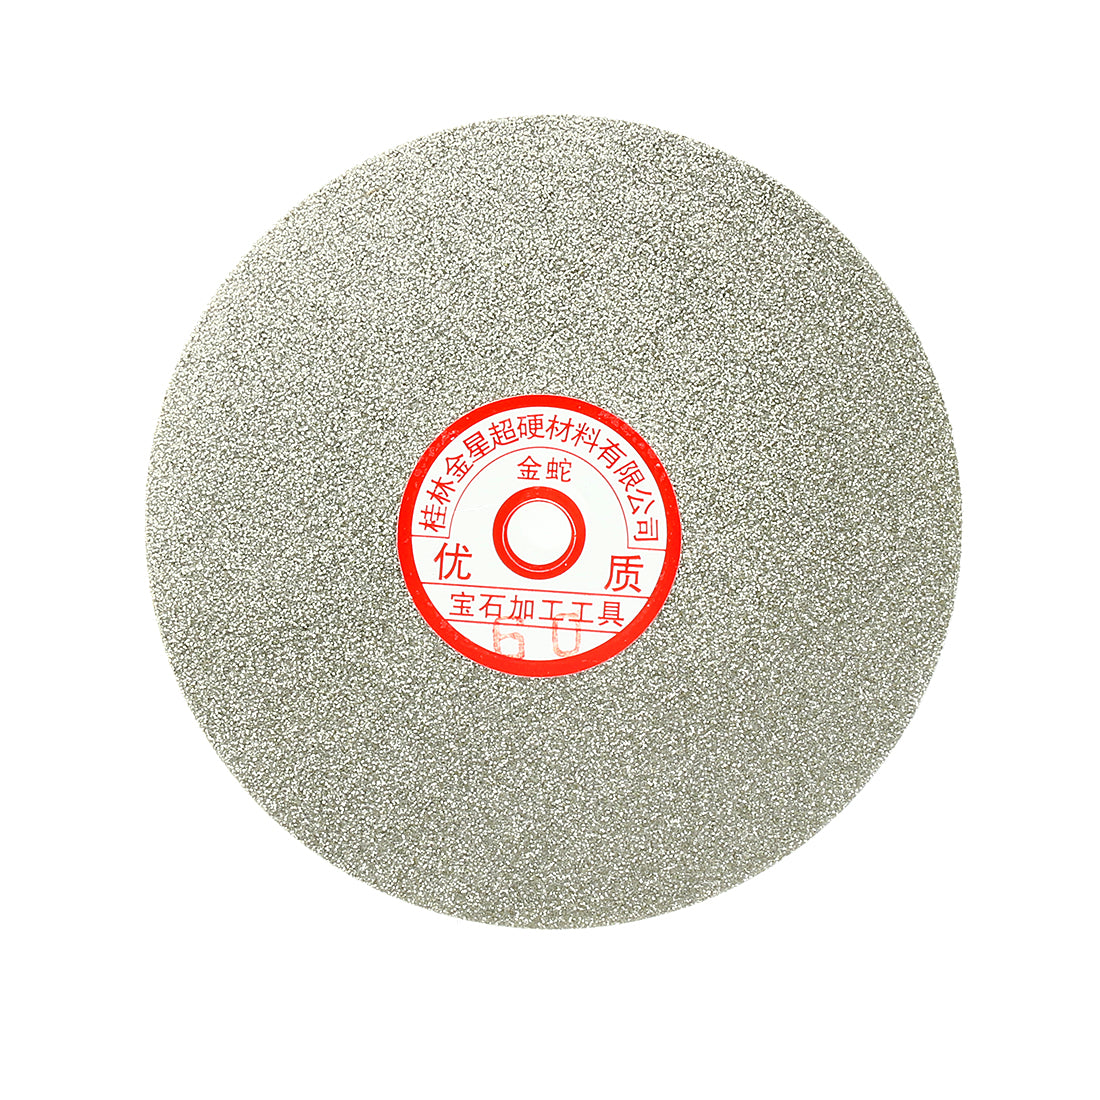 uxcell Uxcell 6-inch Grit 60 Diamond Coated Flat Lap Wheel Grinding Sanding Polishing Disc